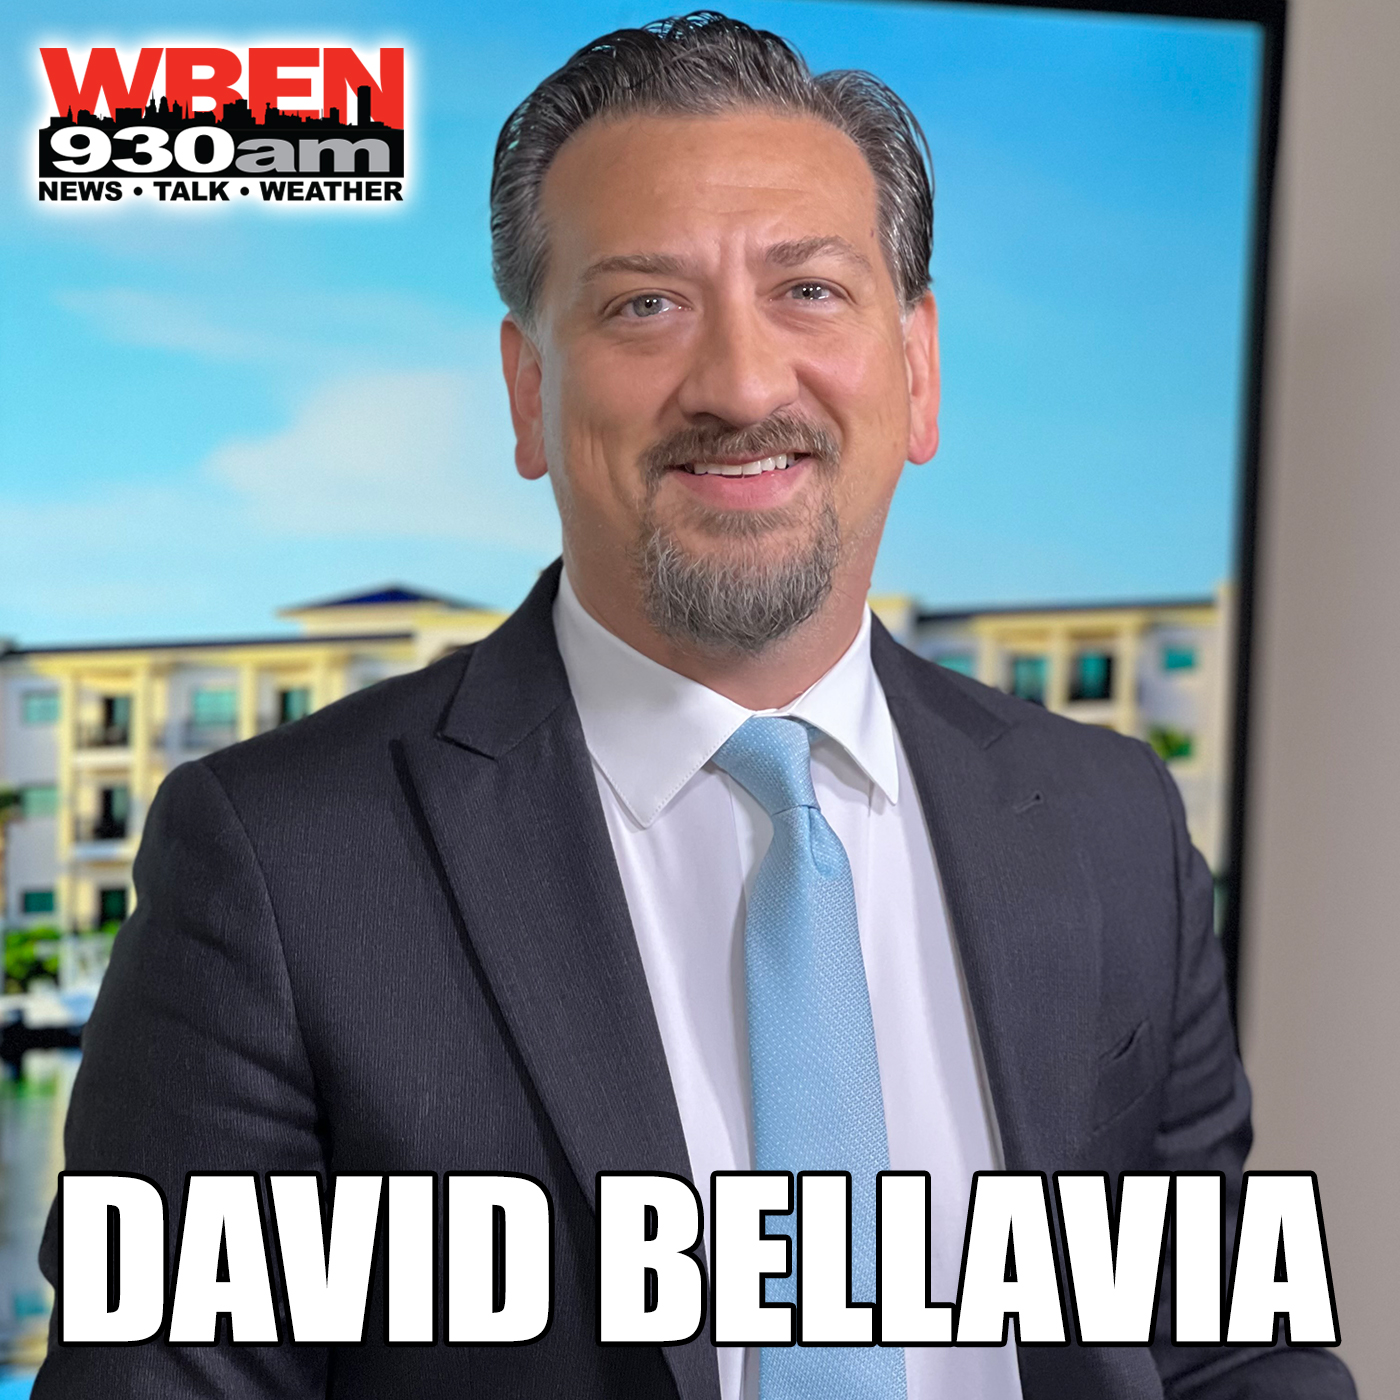 David Bellavia: Stories of Struggles and Adversity 3-4 Hour 2